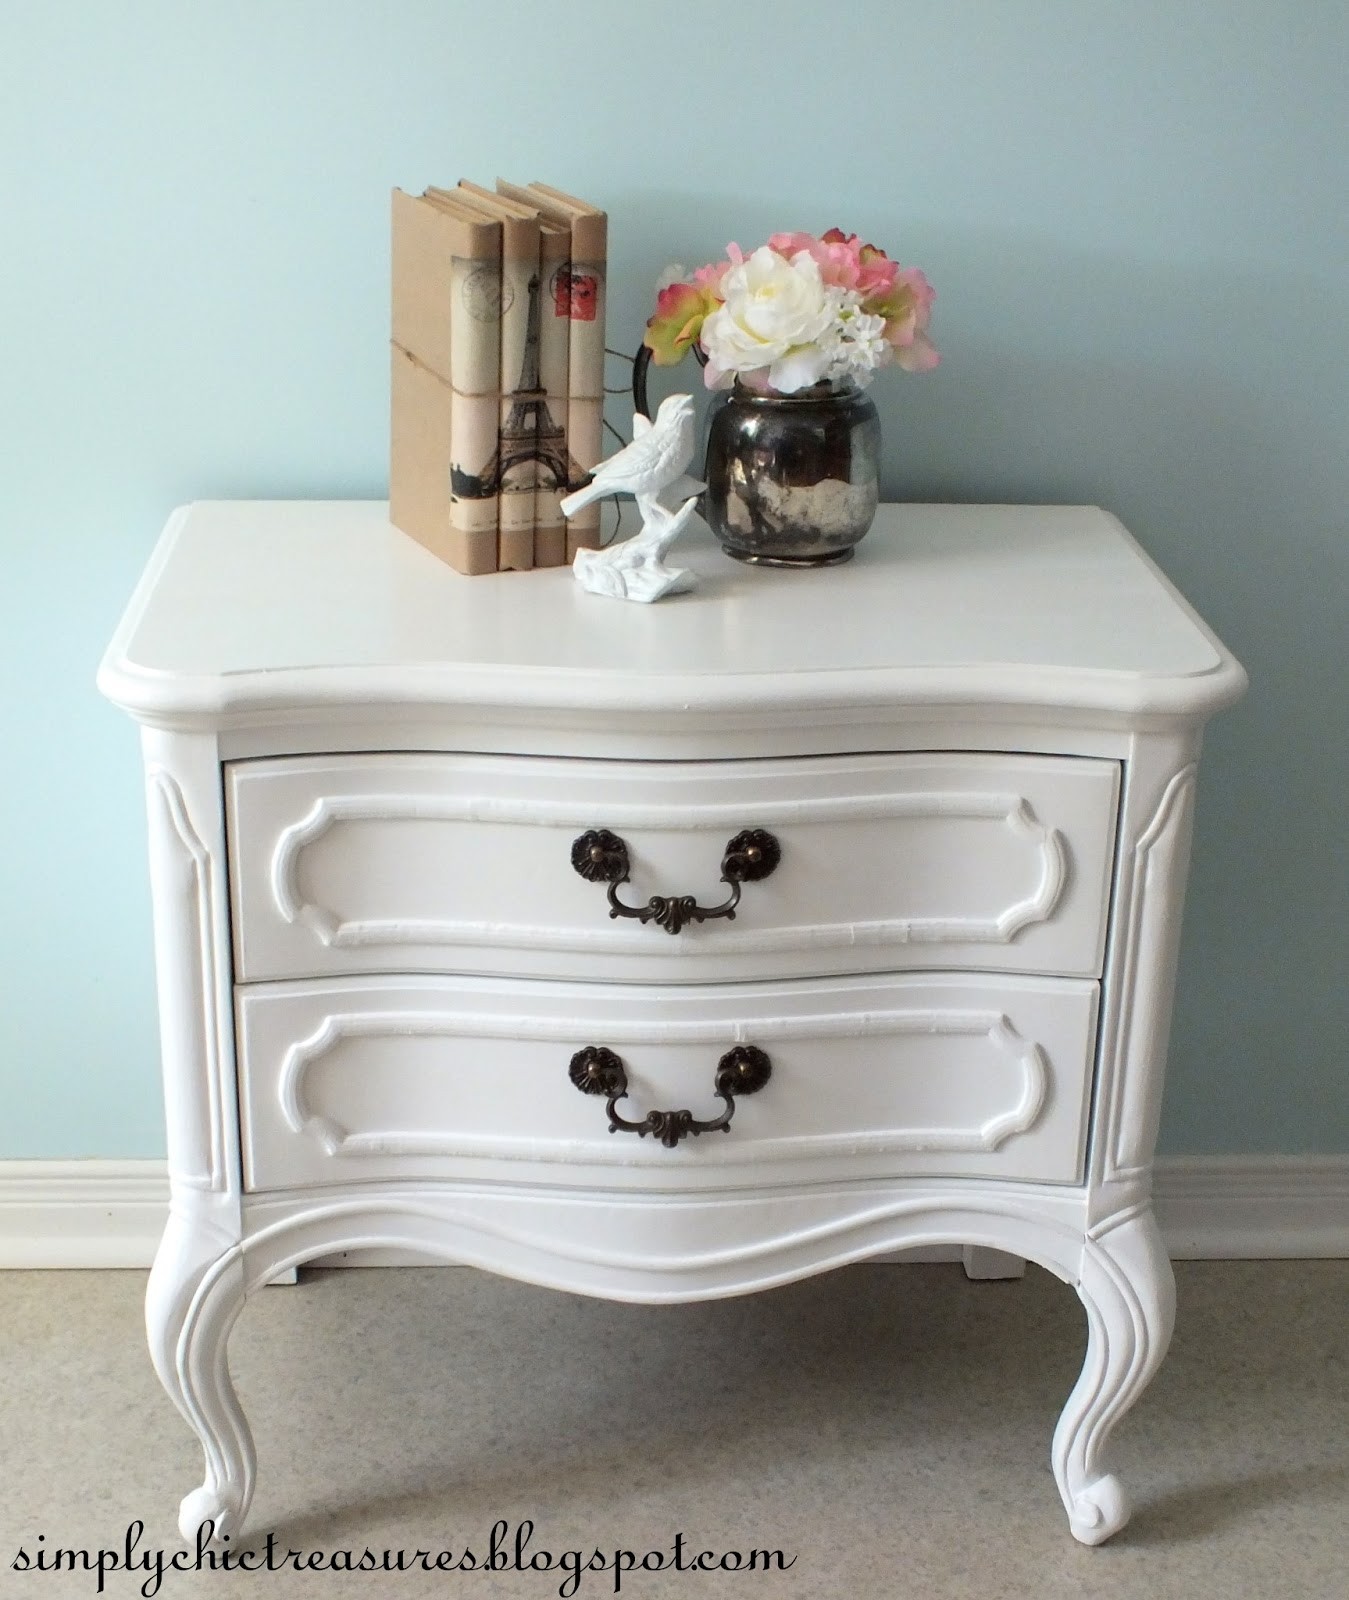 Simply chic treasures white french provincial nightstand